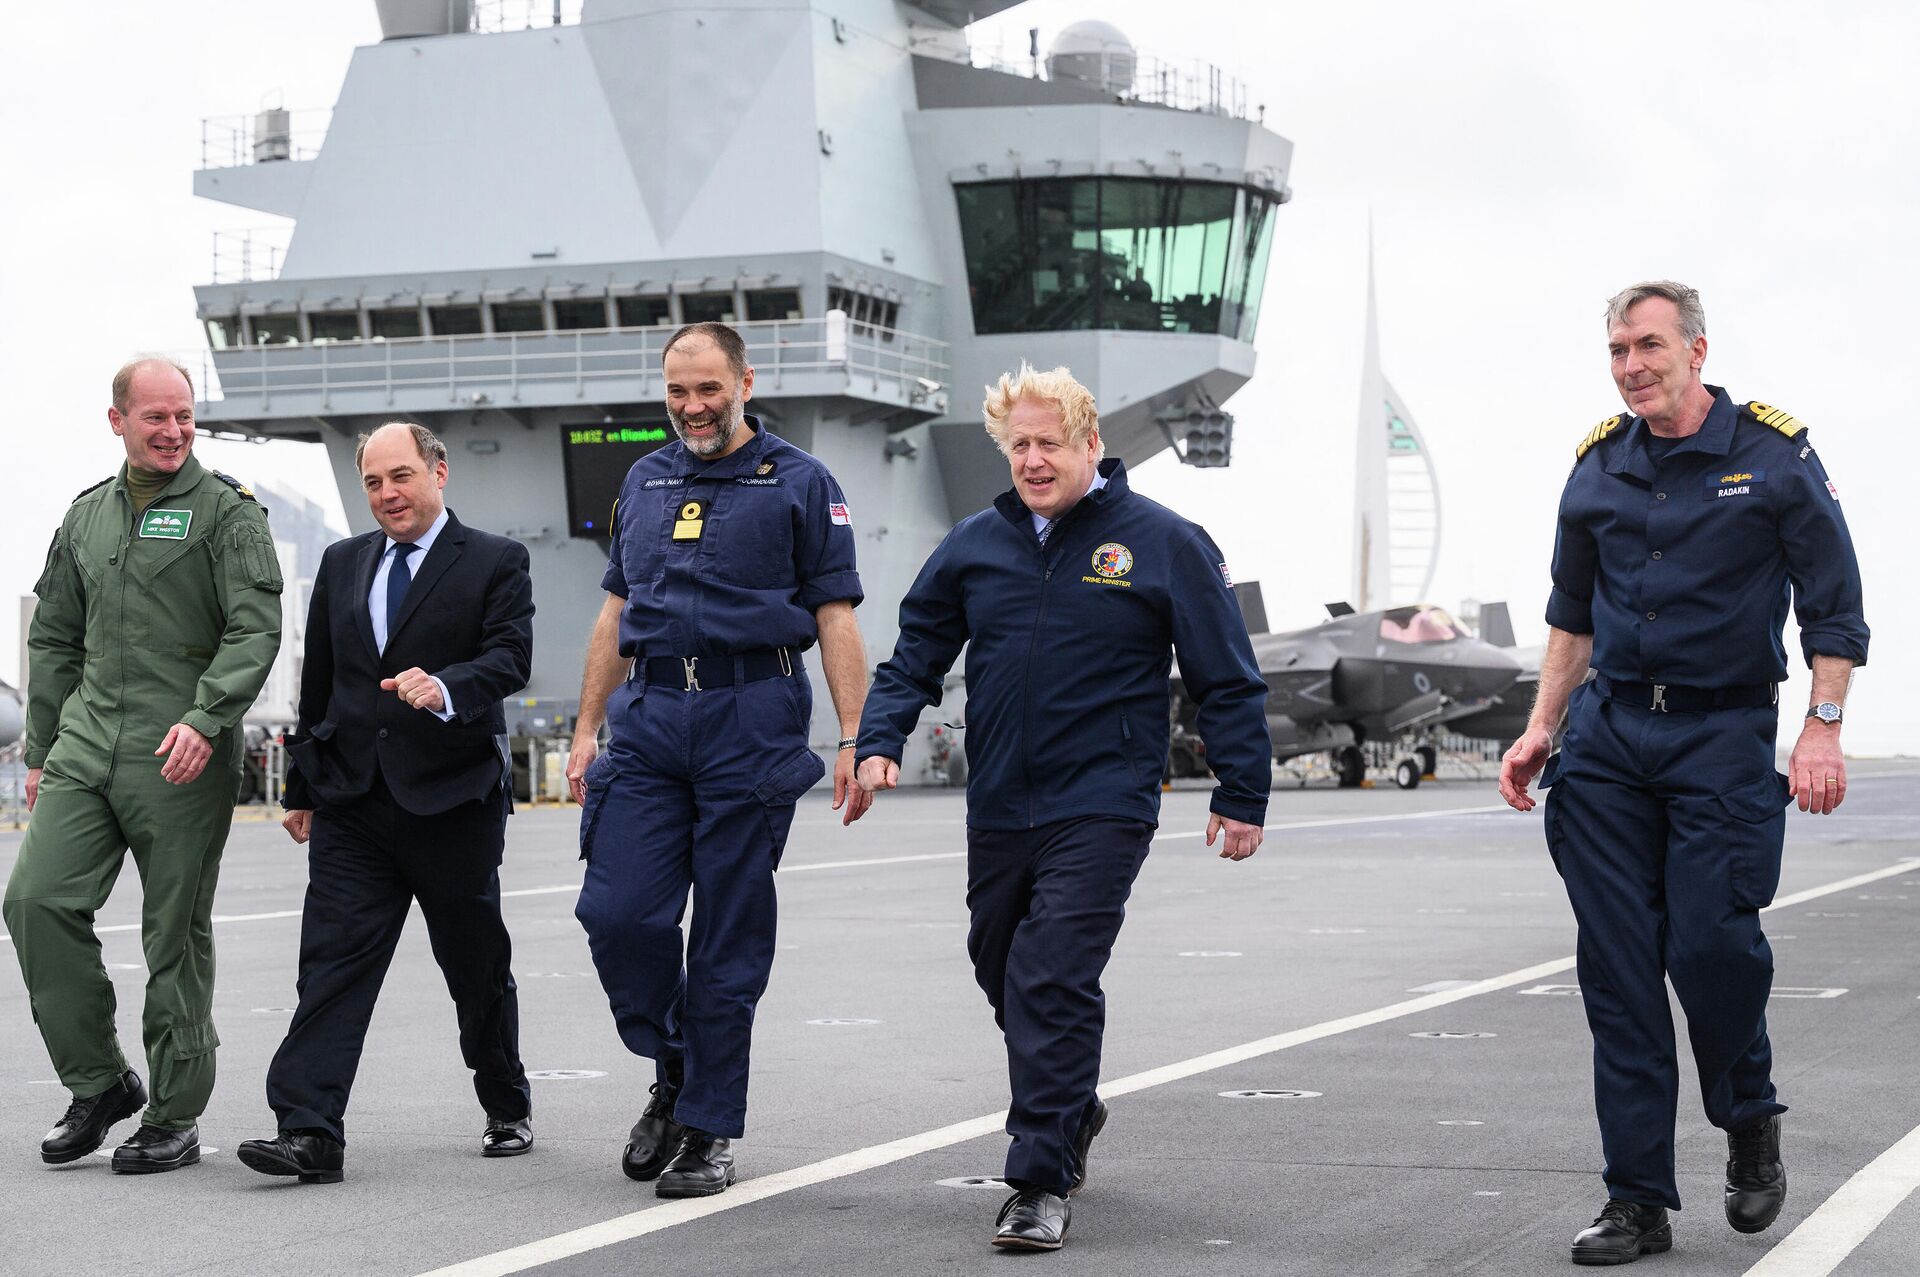 (L-R) Air Chief Marshal Sir Mike Wigston, Defence Secretary Ben Wallace, Commodore Steve Moorhouse, British Prime Minister Boris Johnson and First Sea Lord Admiral Tony Radakin walk on the flight deck as they tour HMS Queen Elizabeth aircraft carrier in Portsmouth, southwest England prior to its departure for Asia in its first operational deployment on May 21, 2021 - Sputnik International, 1920, 08.01.2022